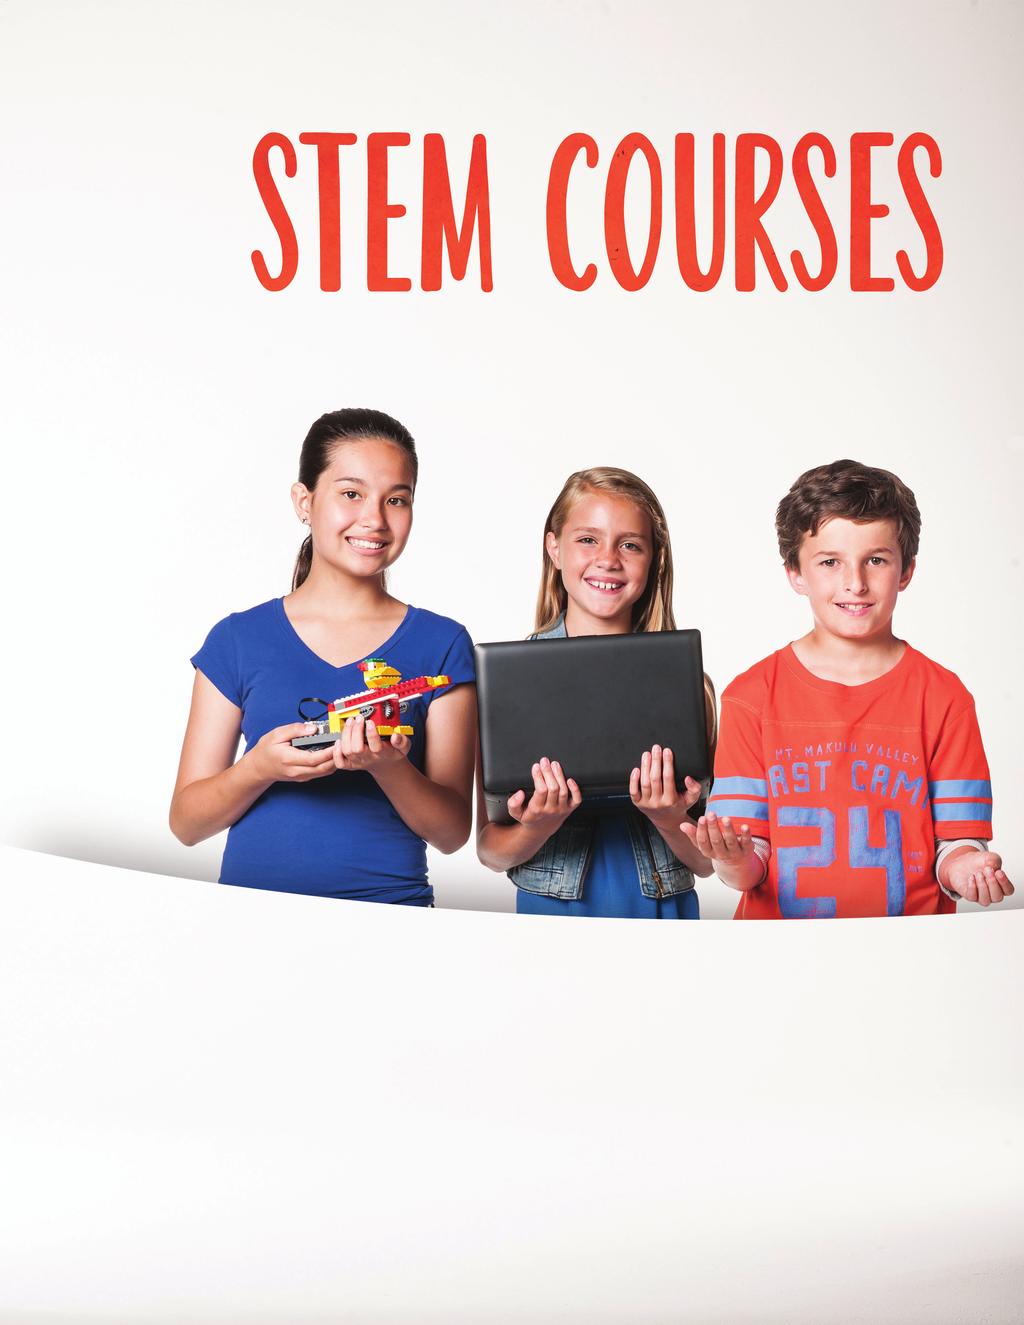 EDGE NEW from Sylvan: ROBOTICS CODING MATH EDGE 1-6 FOR GRADES If you re looking for cutting-edge STEM classes for your child, turn to Sylvan.